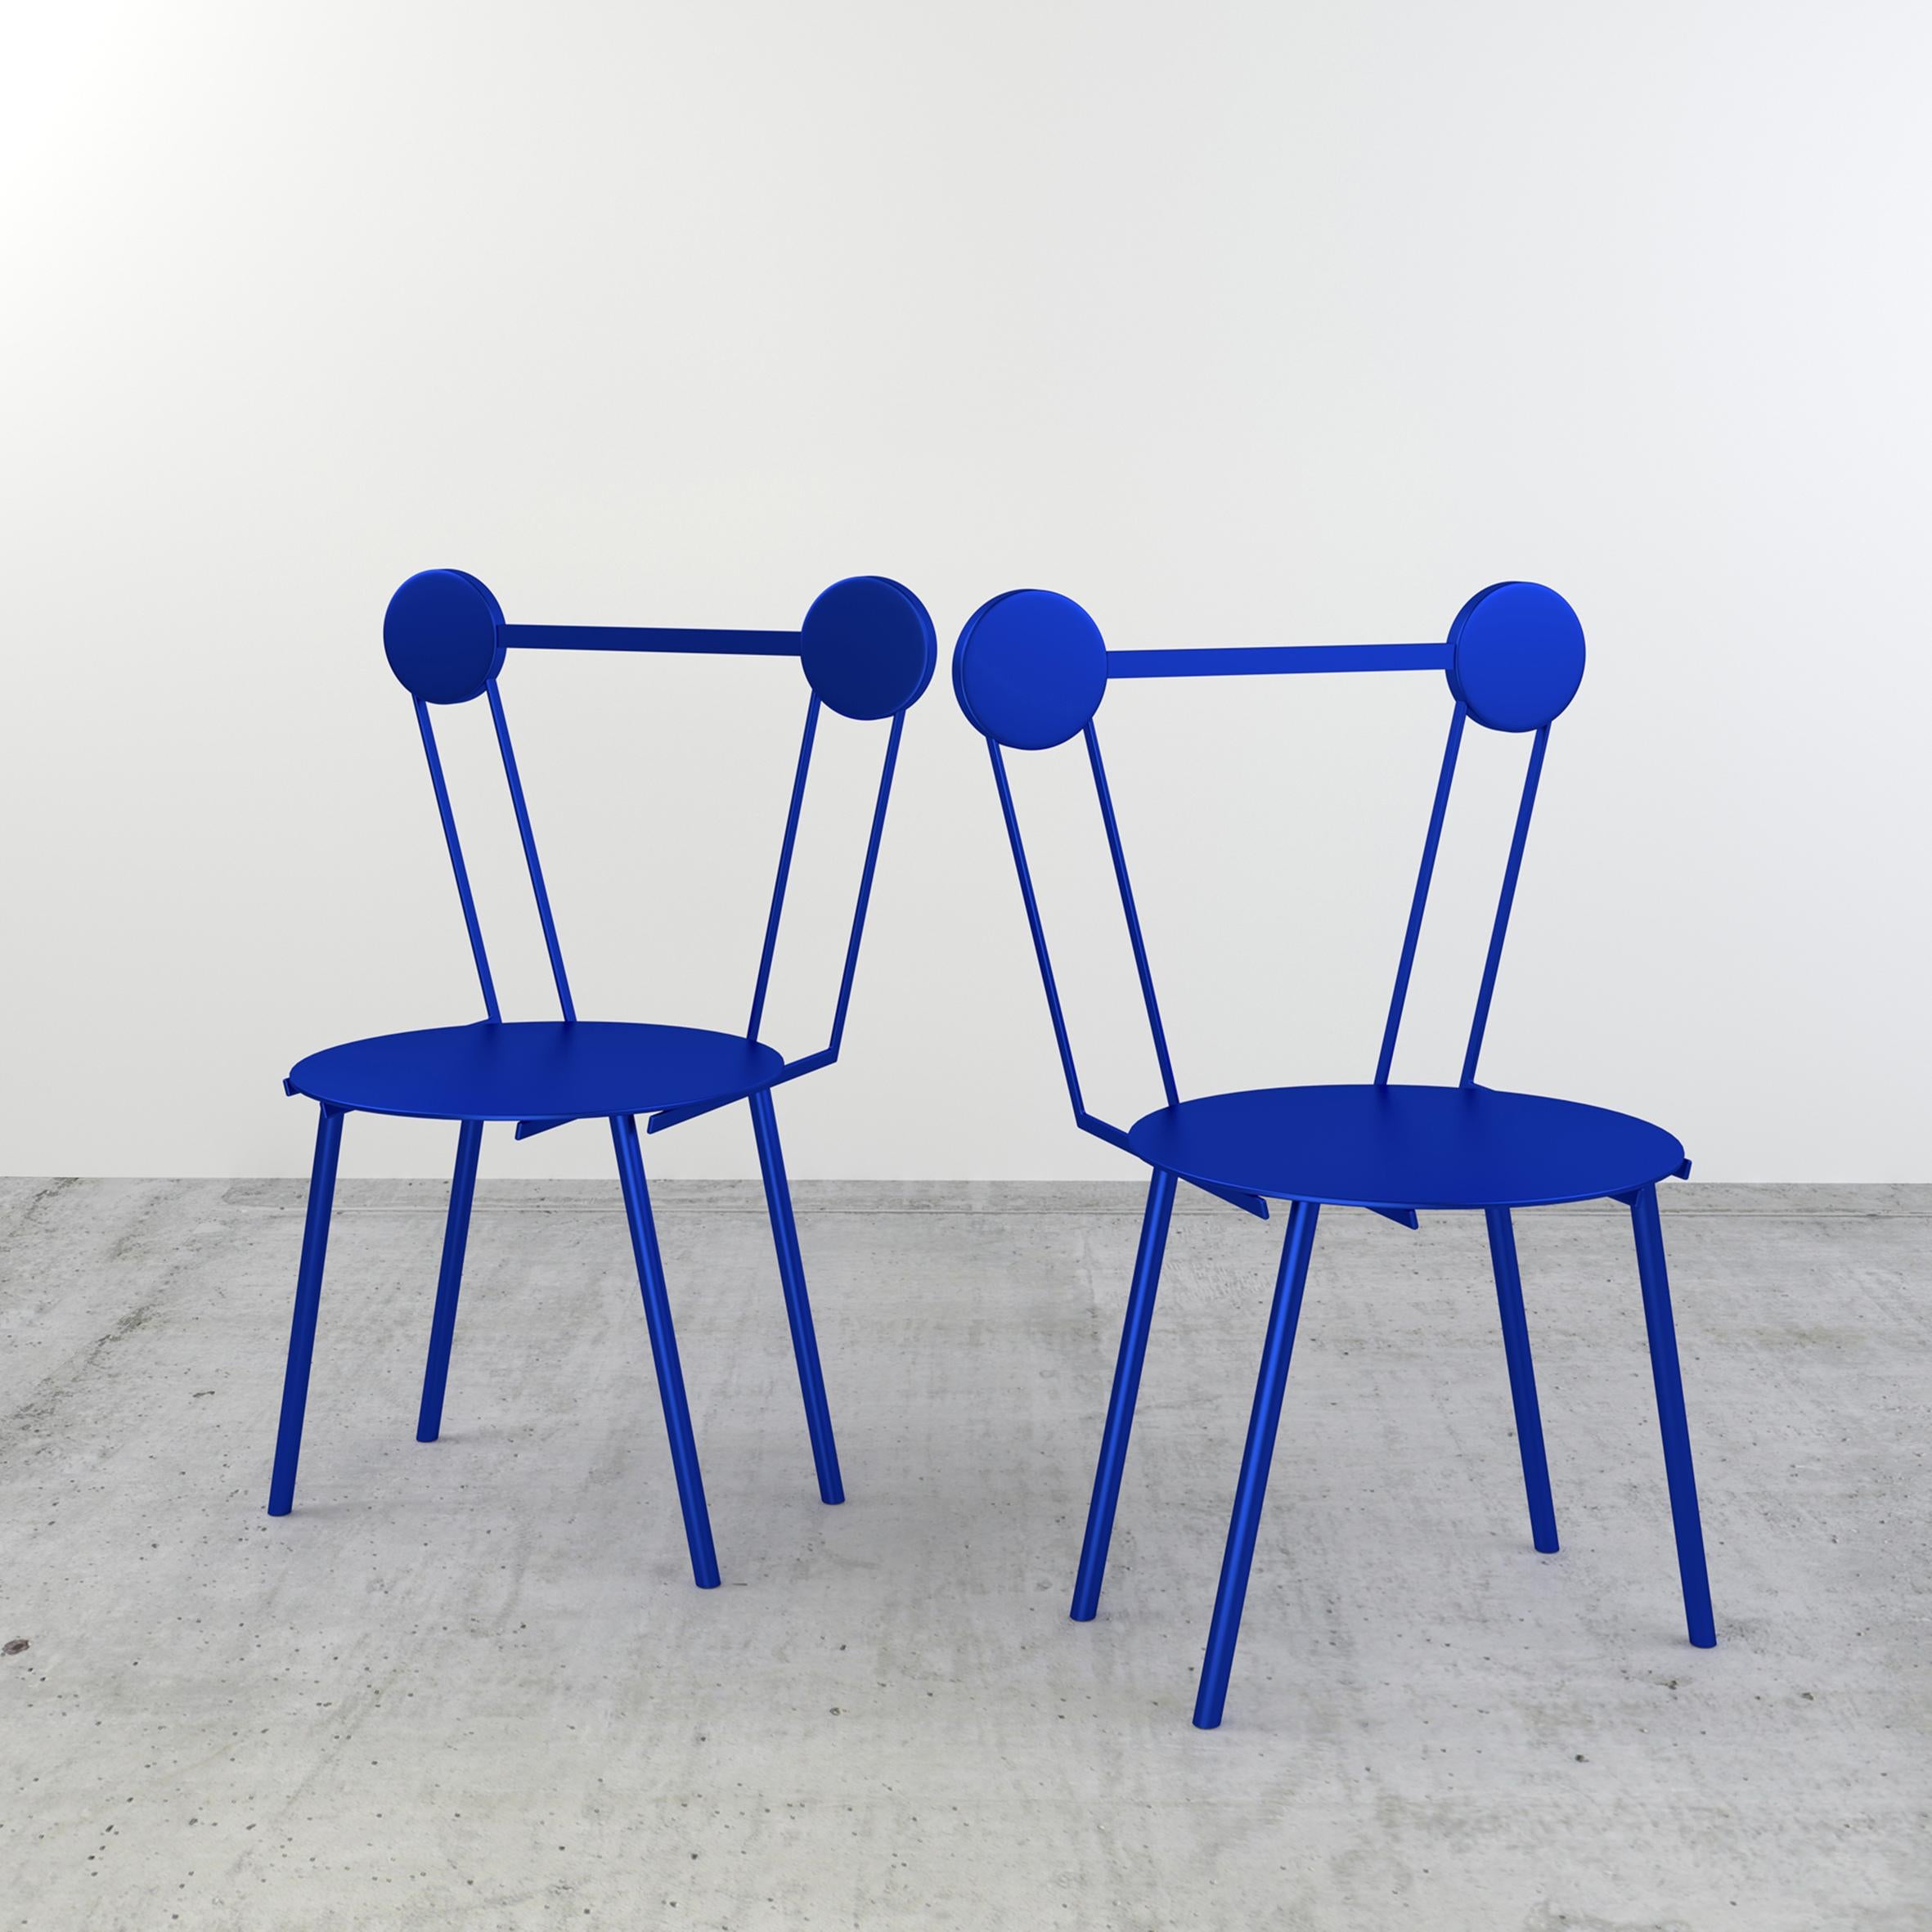 Contemporary Chair Blue Haly Aluminium by Chapel Petrassi (Sonstiges) im Angebot